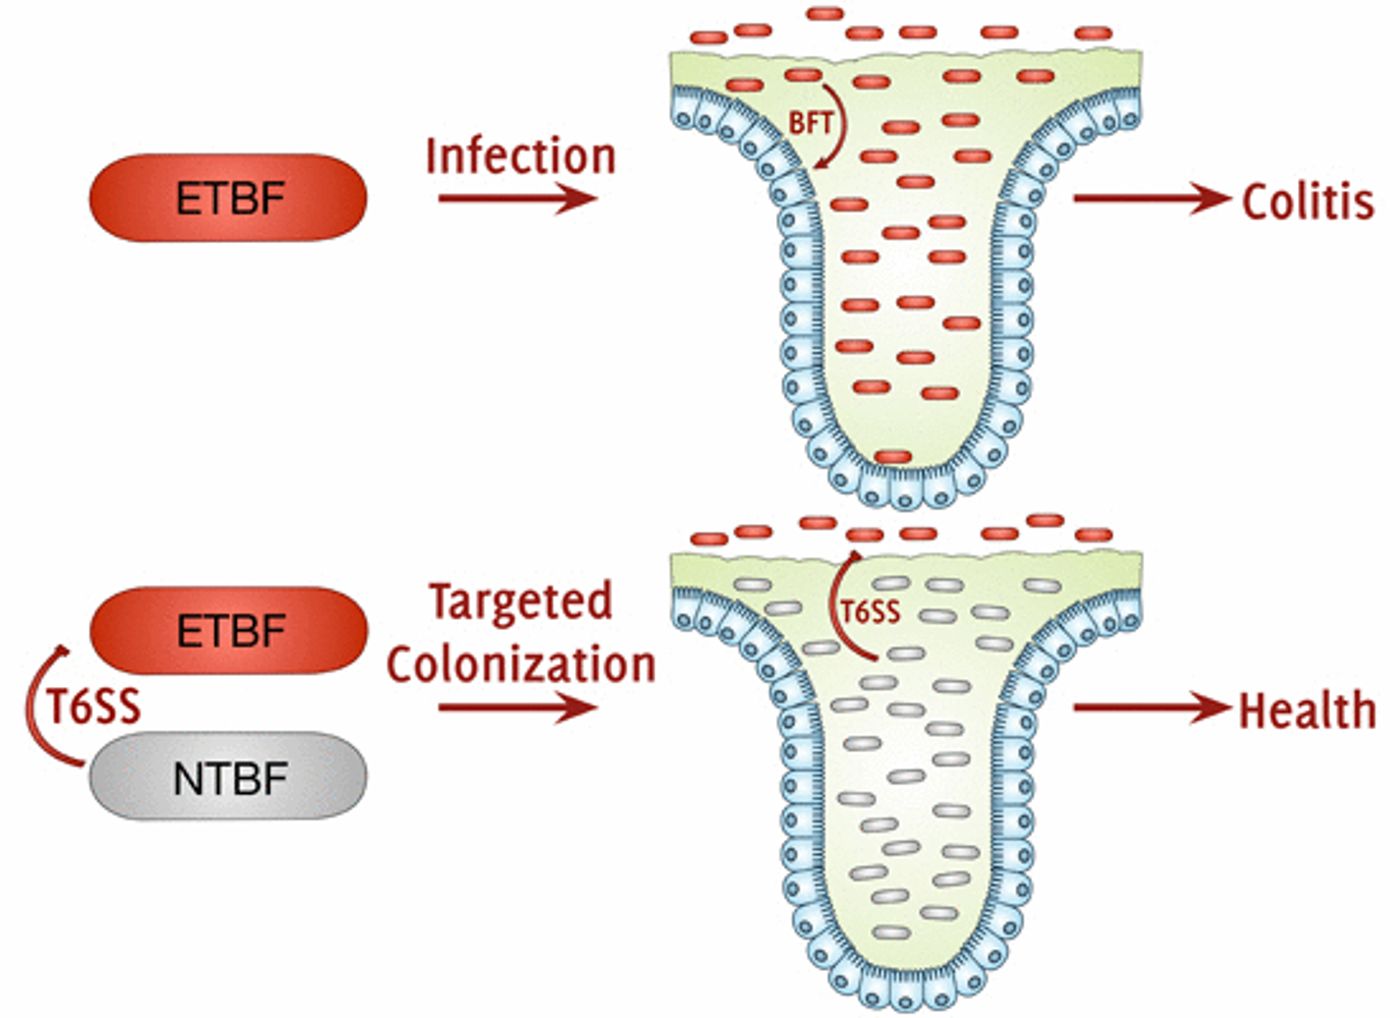 The probiotic potential of colonization is demonstrated with non?toxigenic Bacteroides fragilis (NBTF), protecting the host from enterotoxigenic B. fragilis?induced (EBTF) disease through intraspecific competition via type VI secretion. / Credit: EMBO Reports Hecht et al